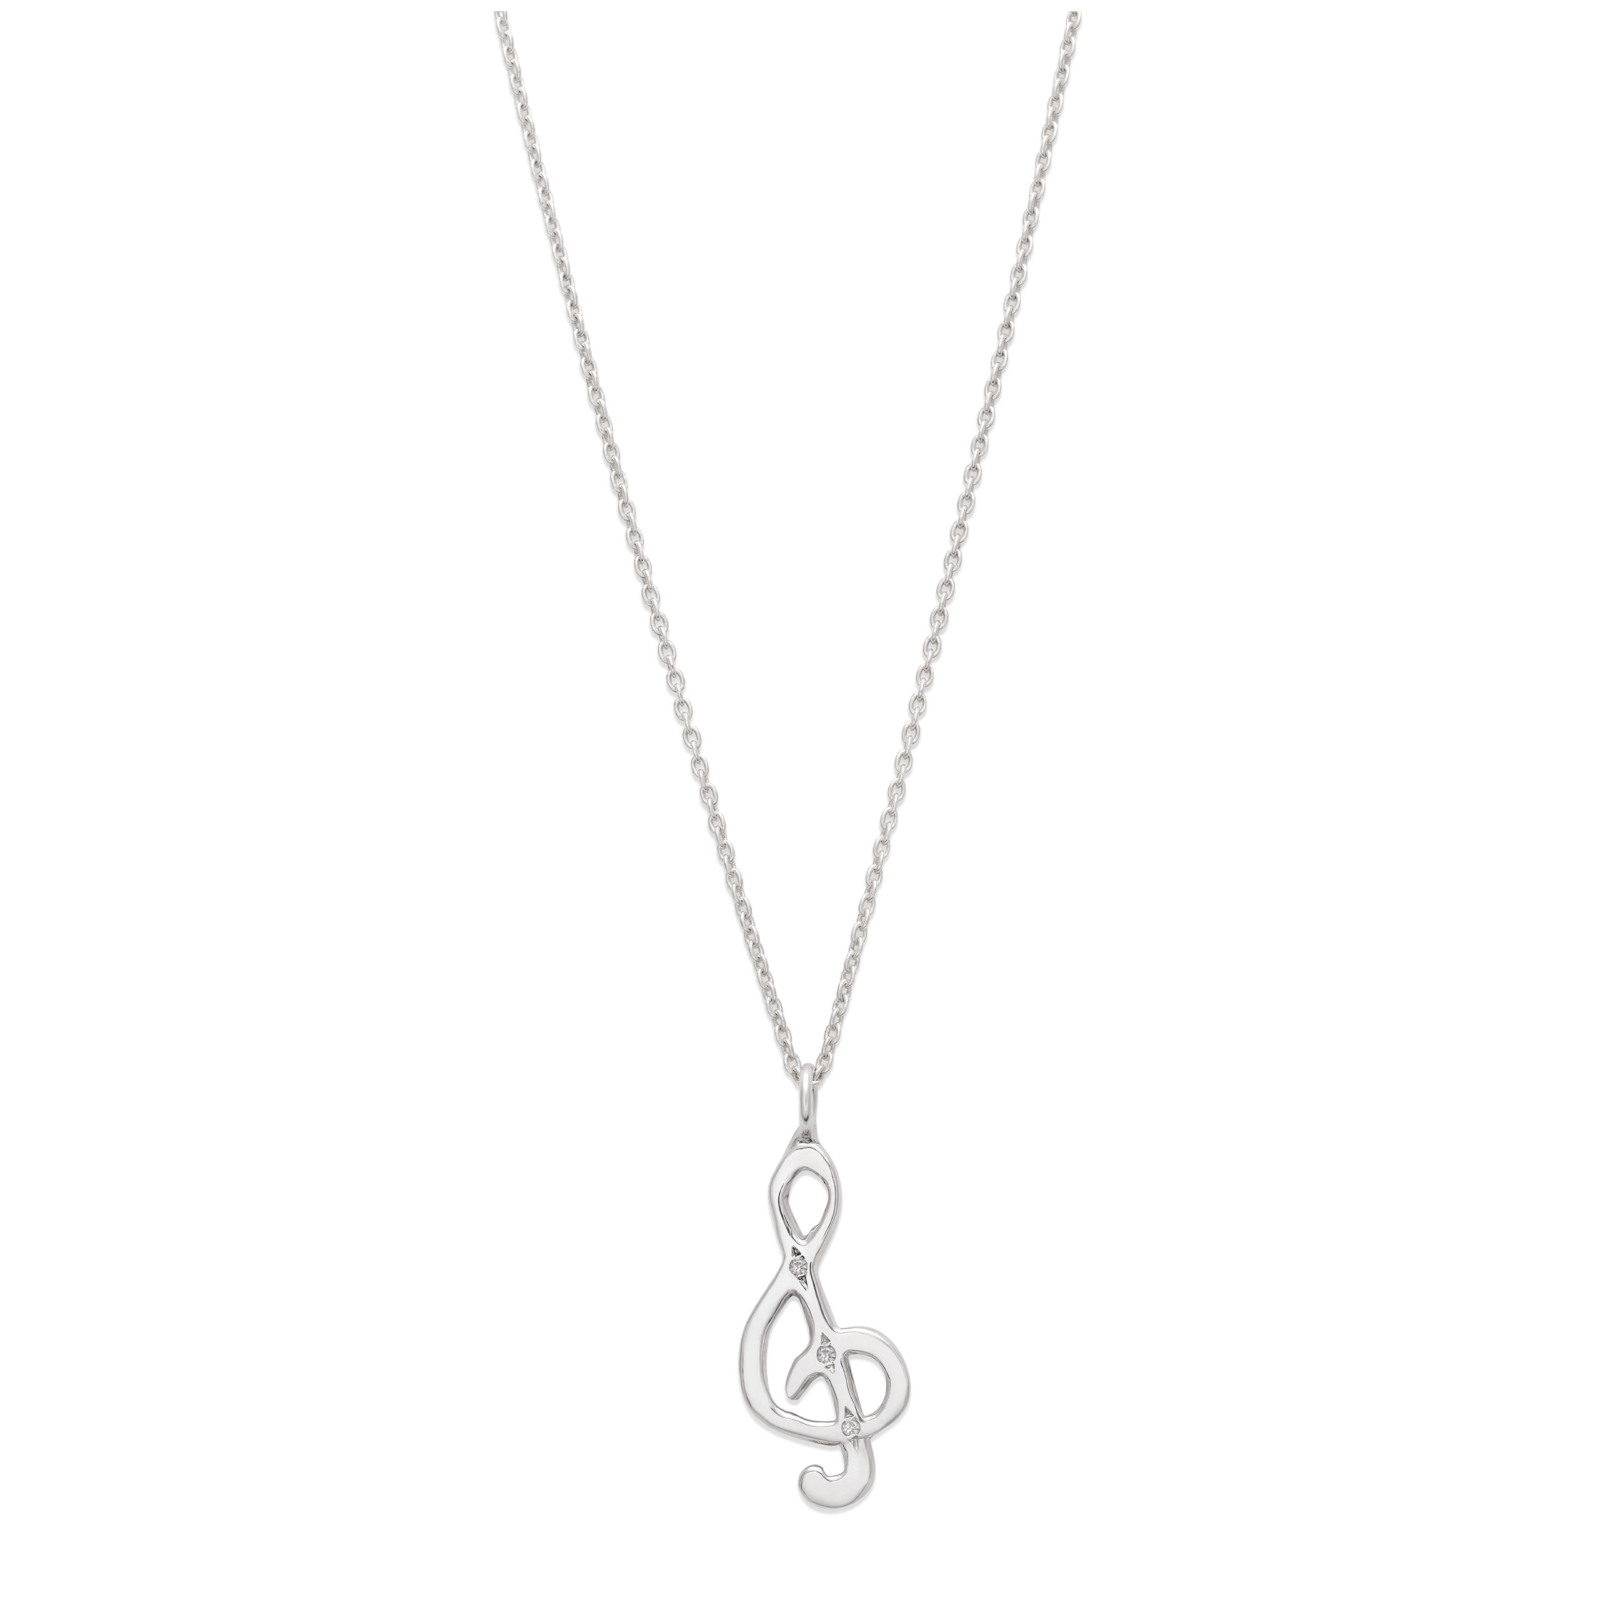 Treble clef charm necklace in sterling silver with white diamonds